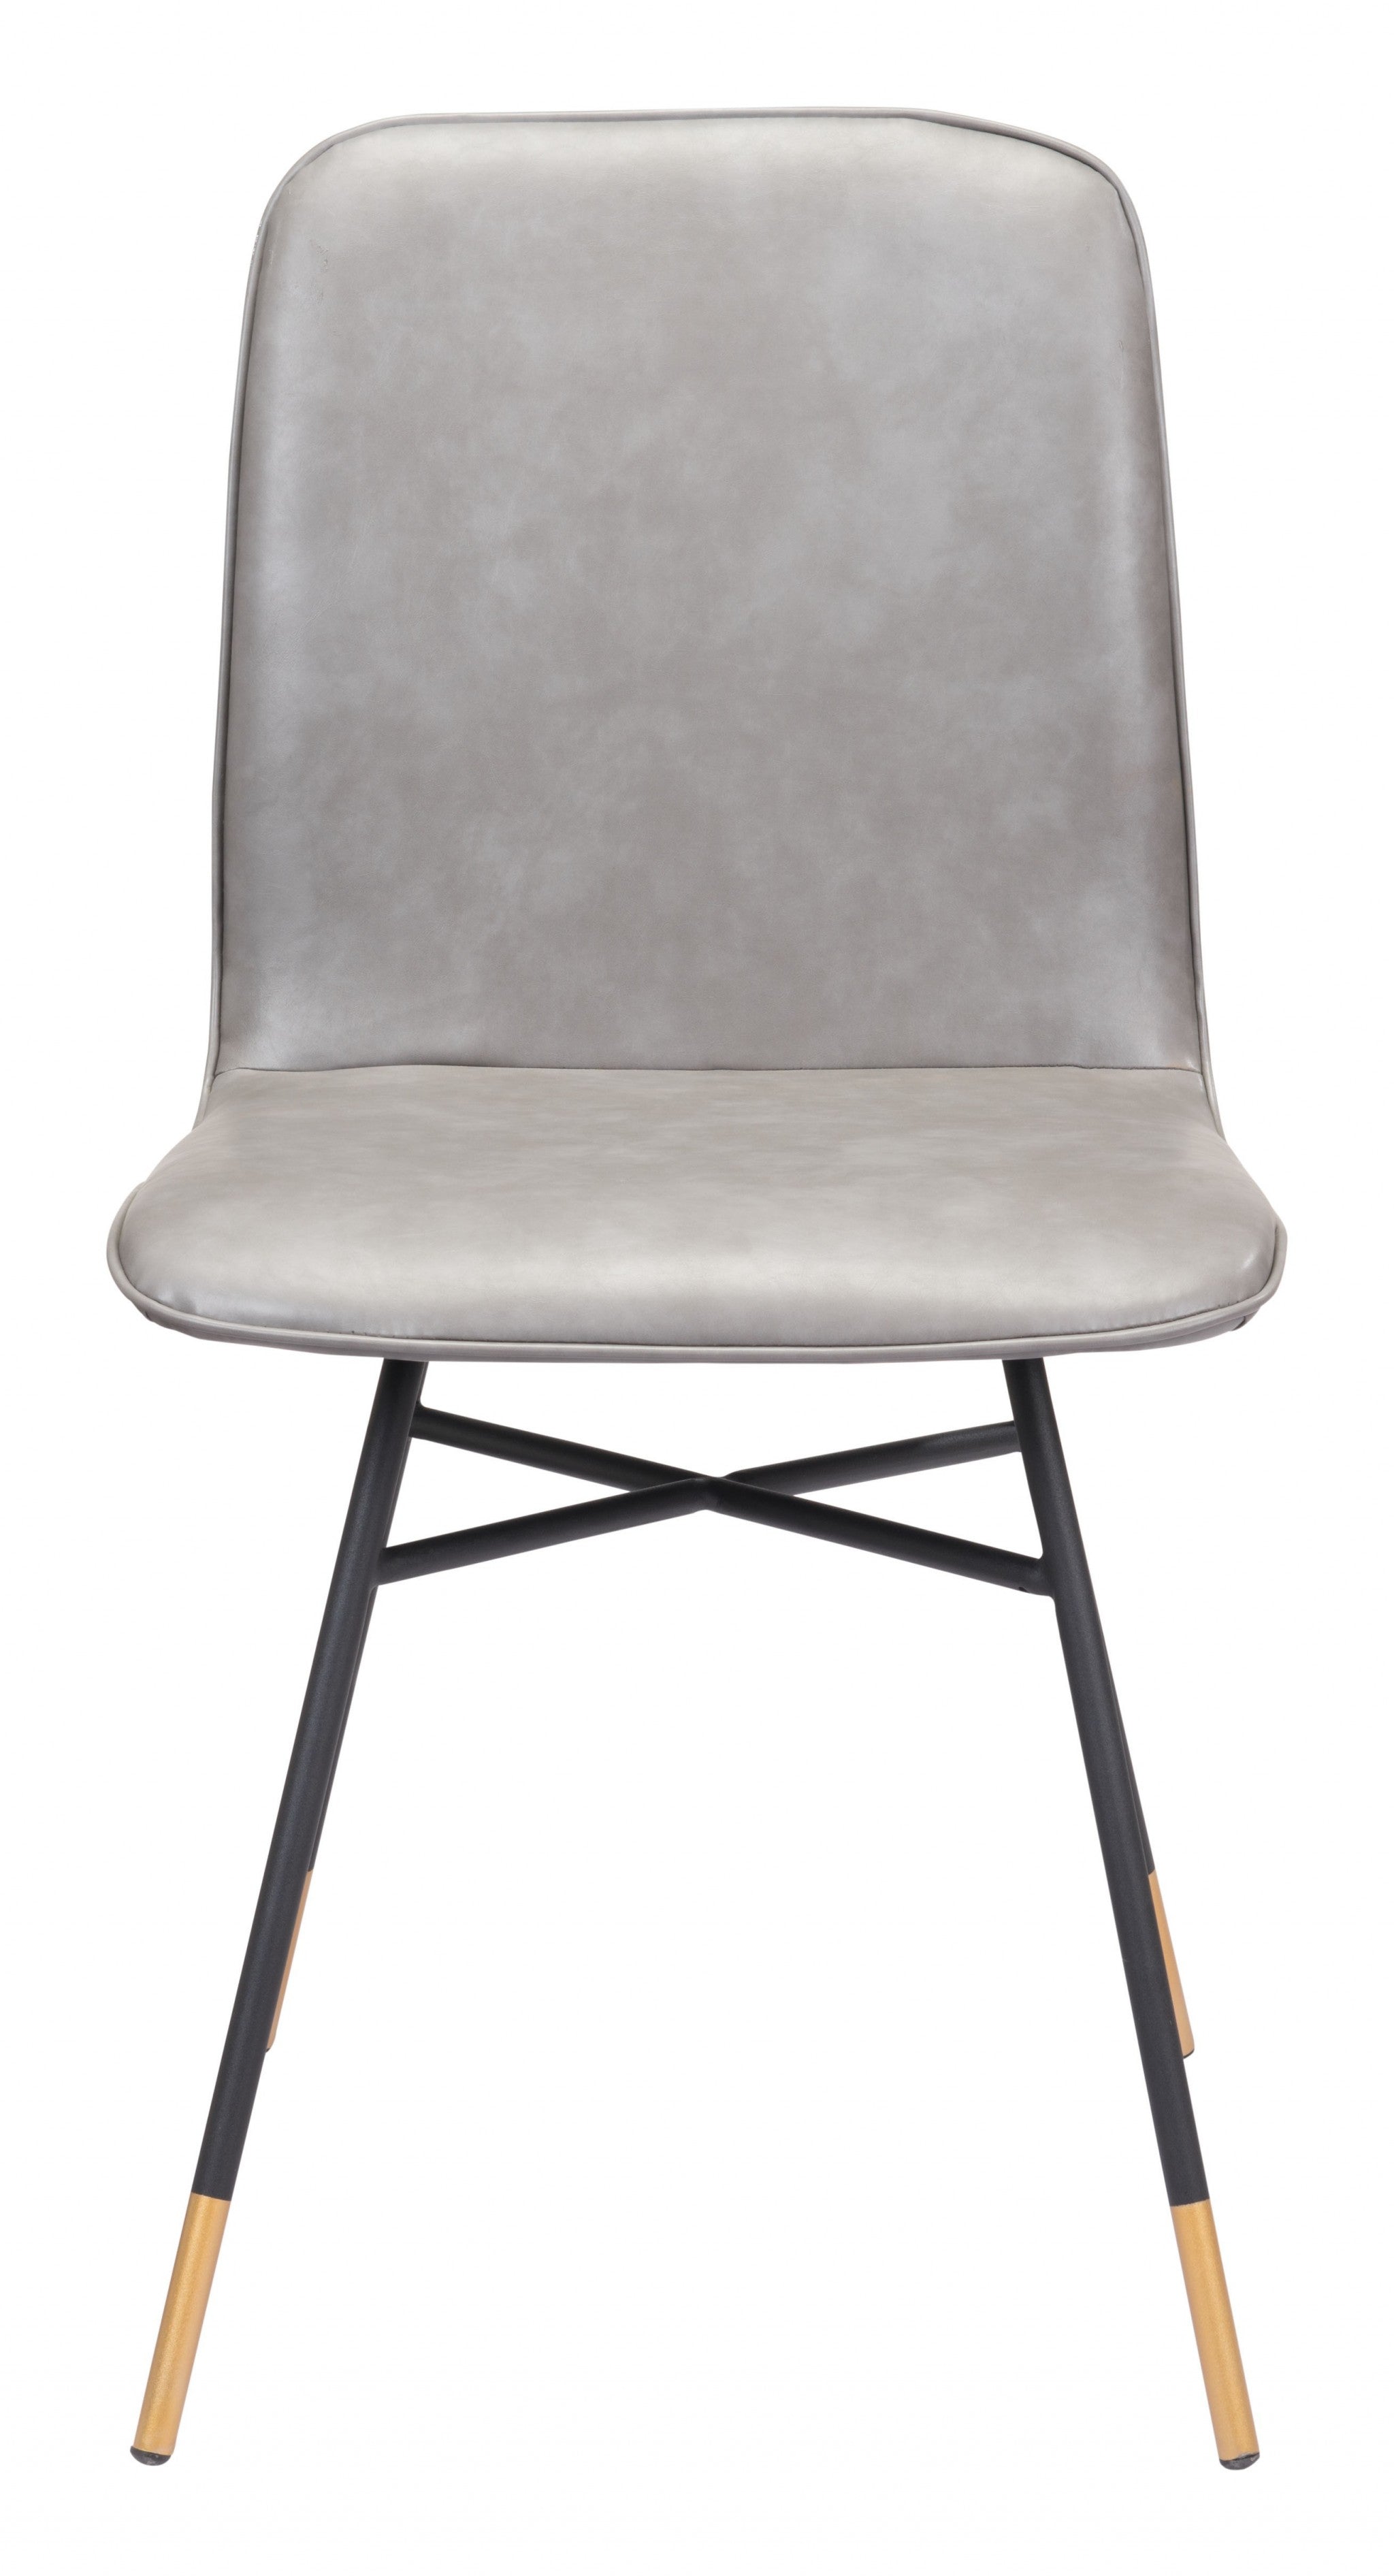 Set of Two Gray and Black Upholstered Faux Leather Dining Side Chairs